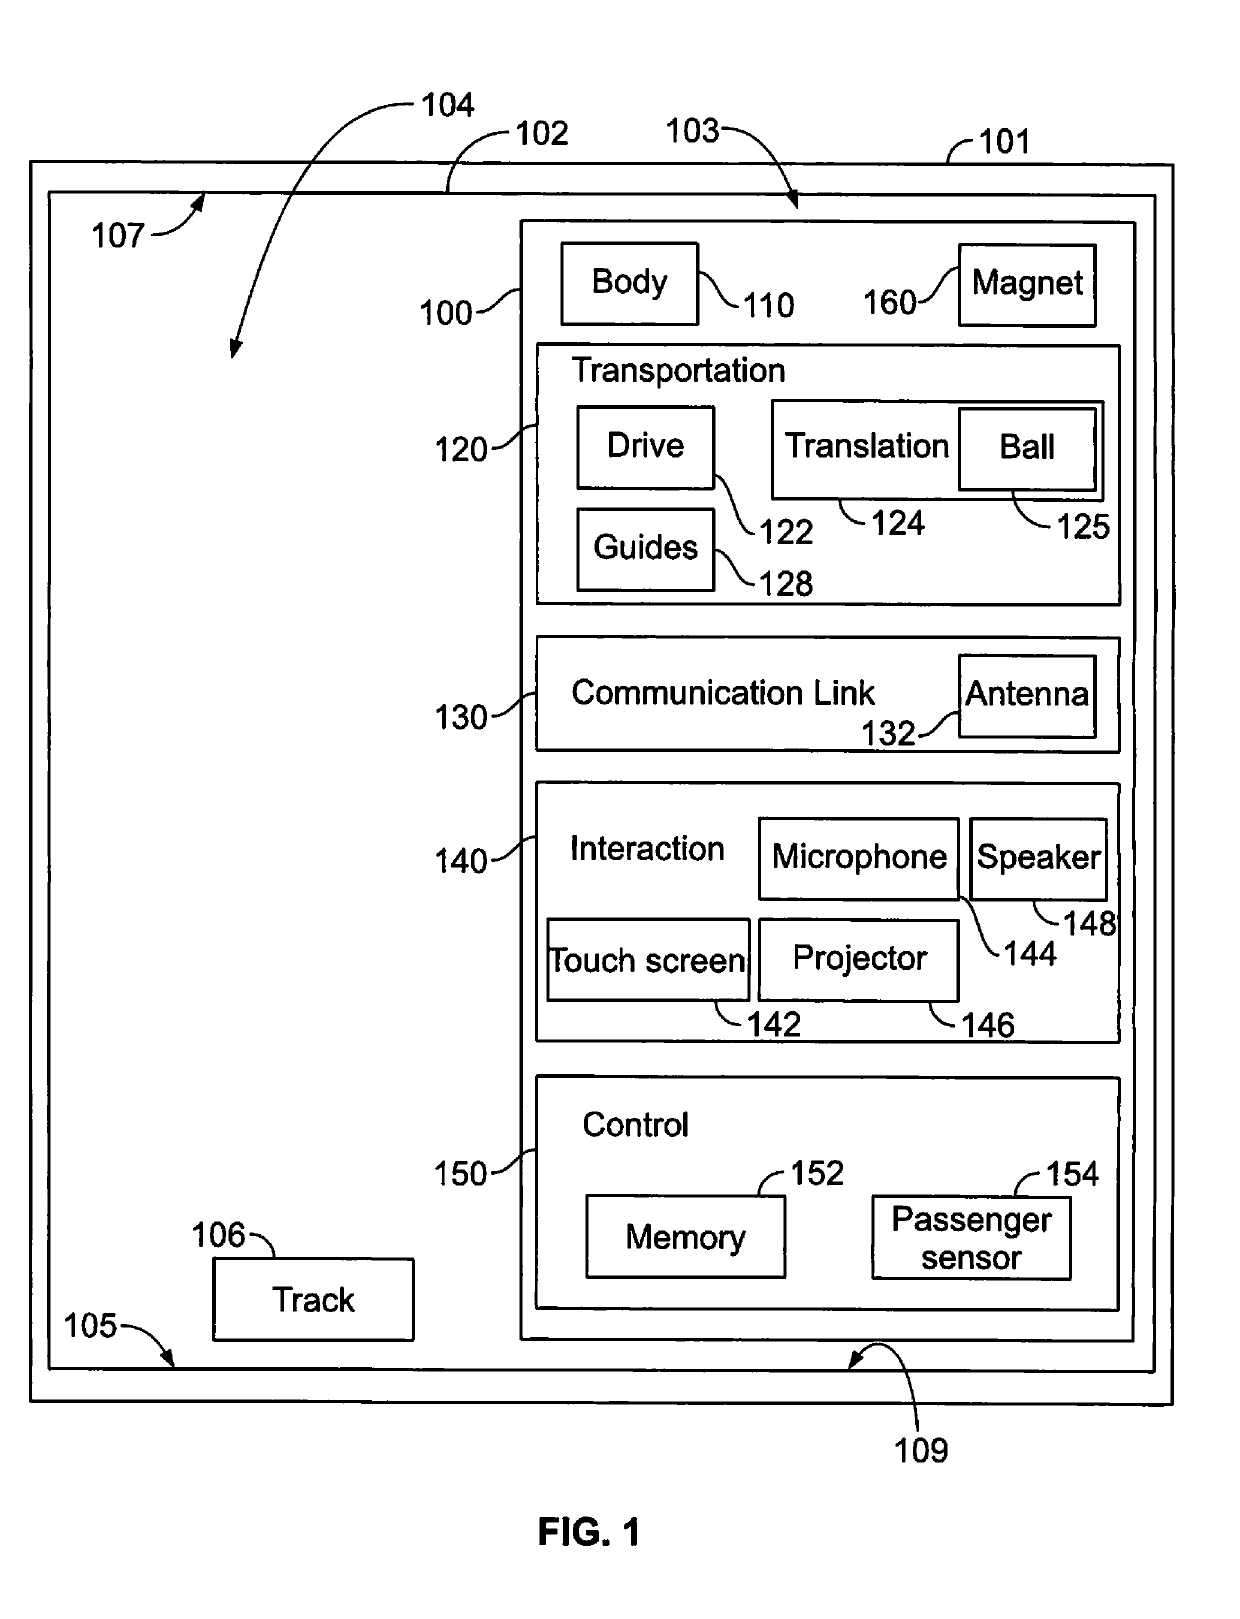 Systems and methods for in-flight crew assistance